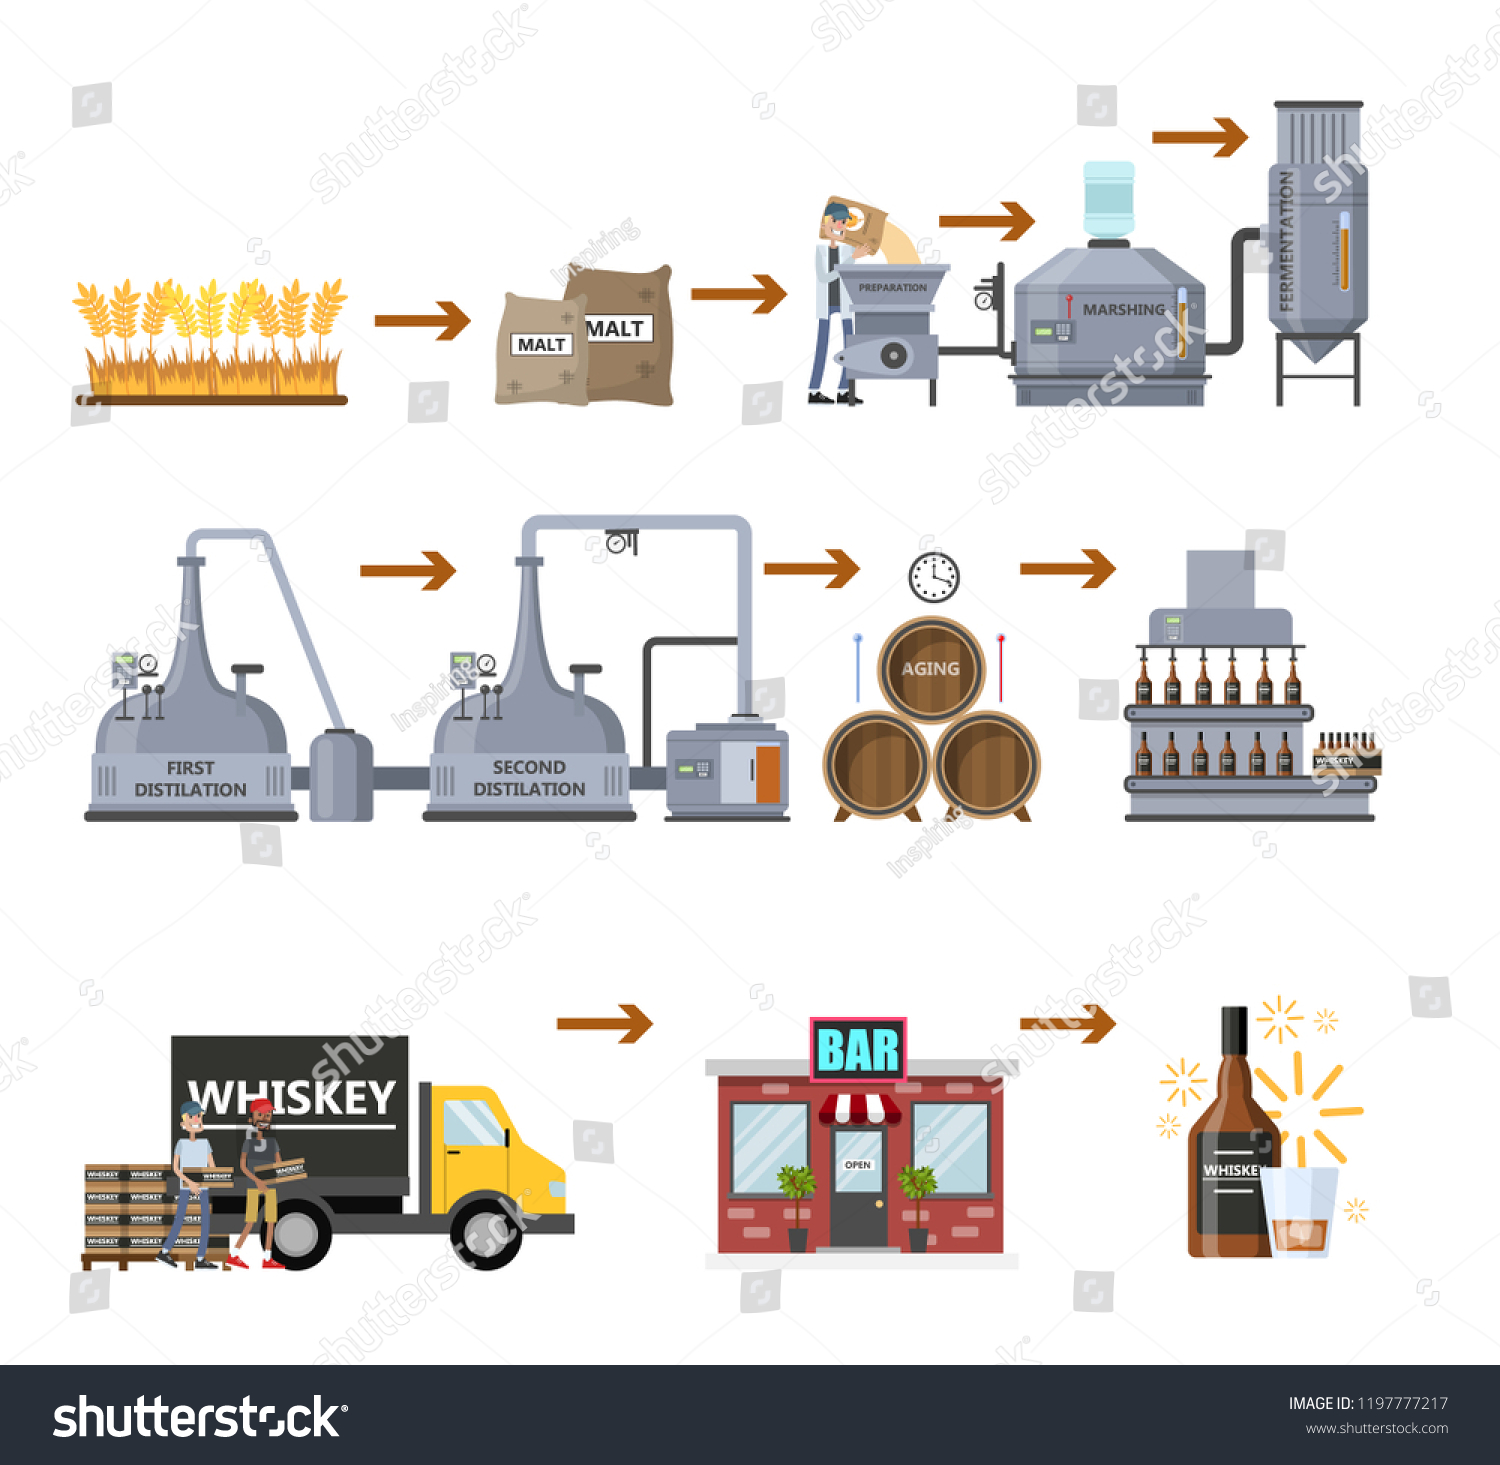 Whiskey Production Process Fermentation Distillation Aging Stock Vector ...